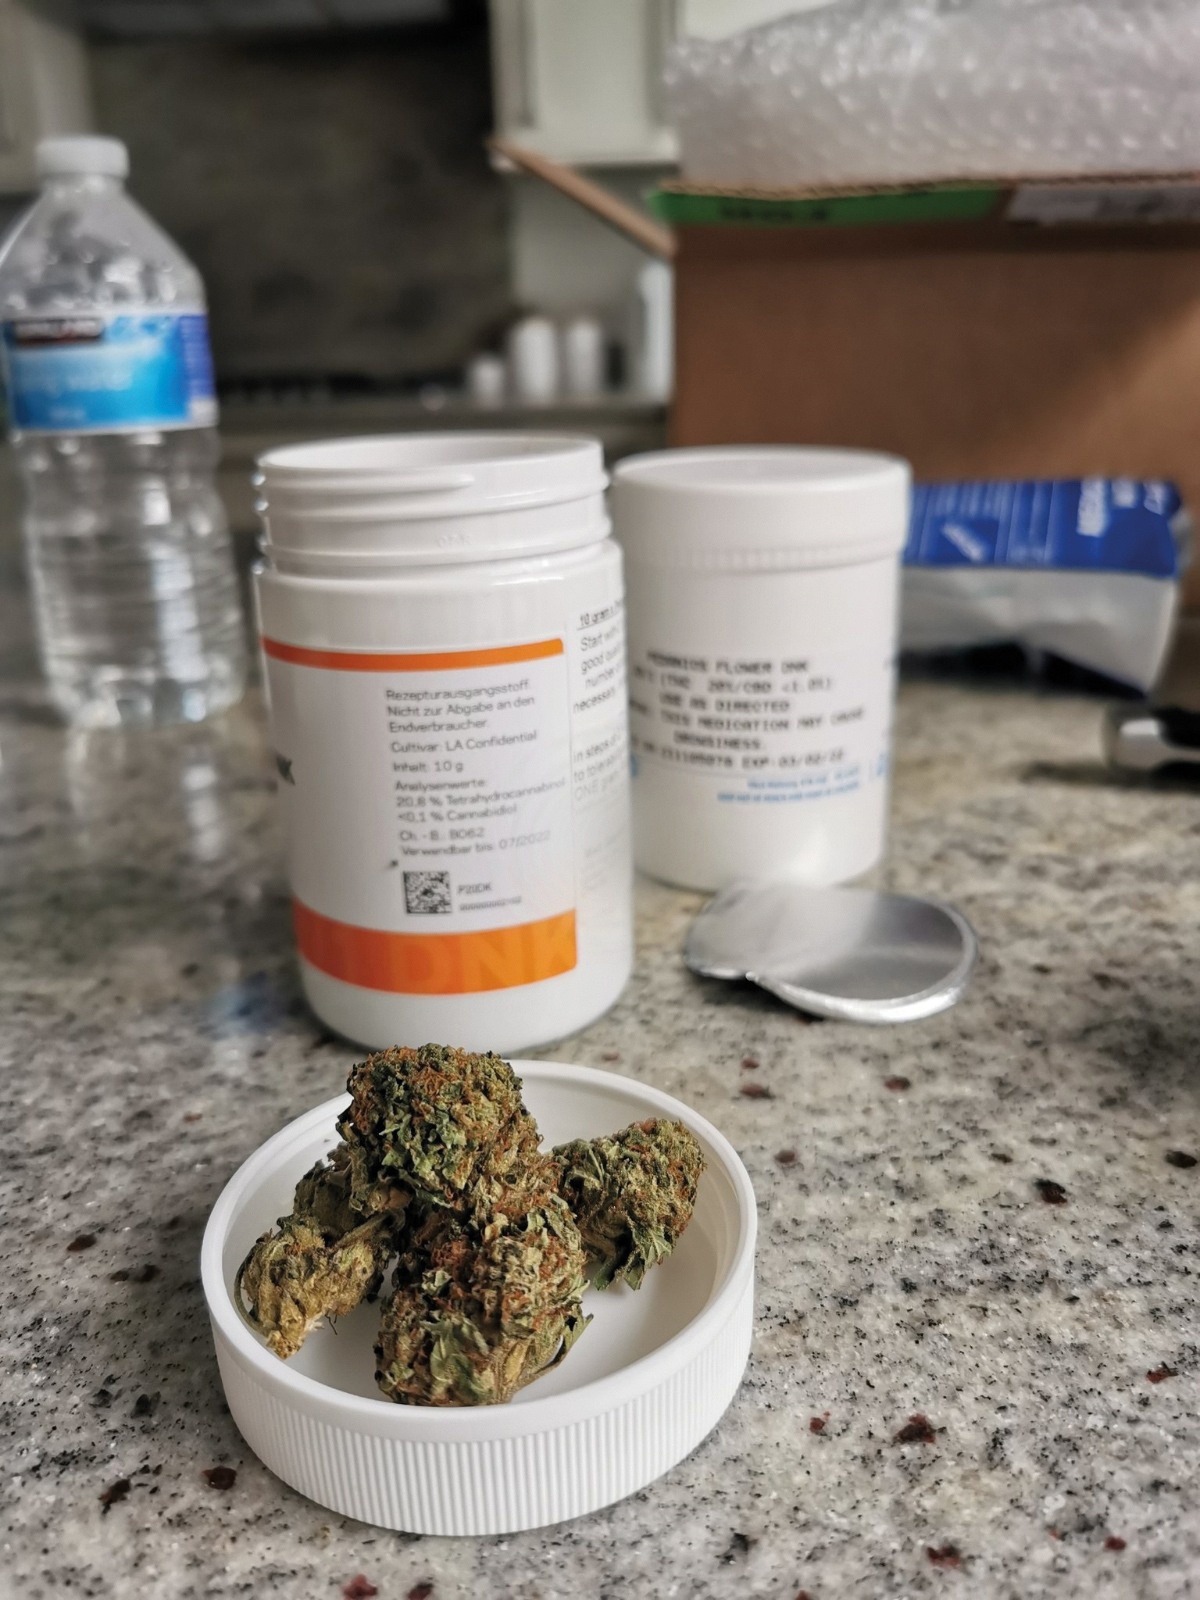 Cannabis patient Matt’s prescription (pictured) is legal, but costs twice what it would illegally on the street.